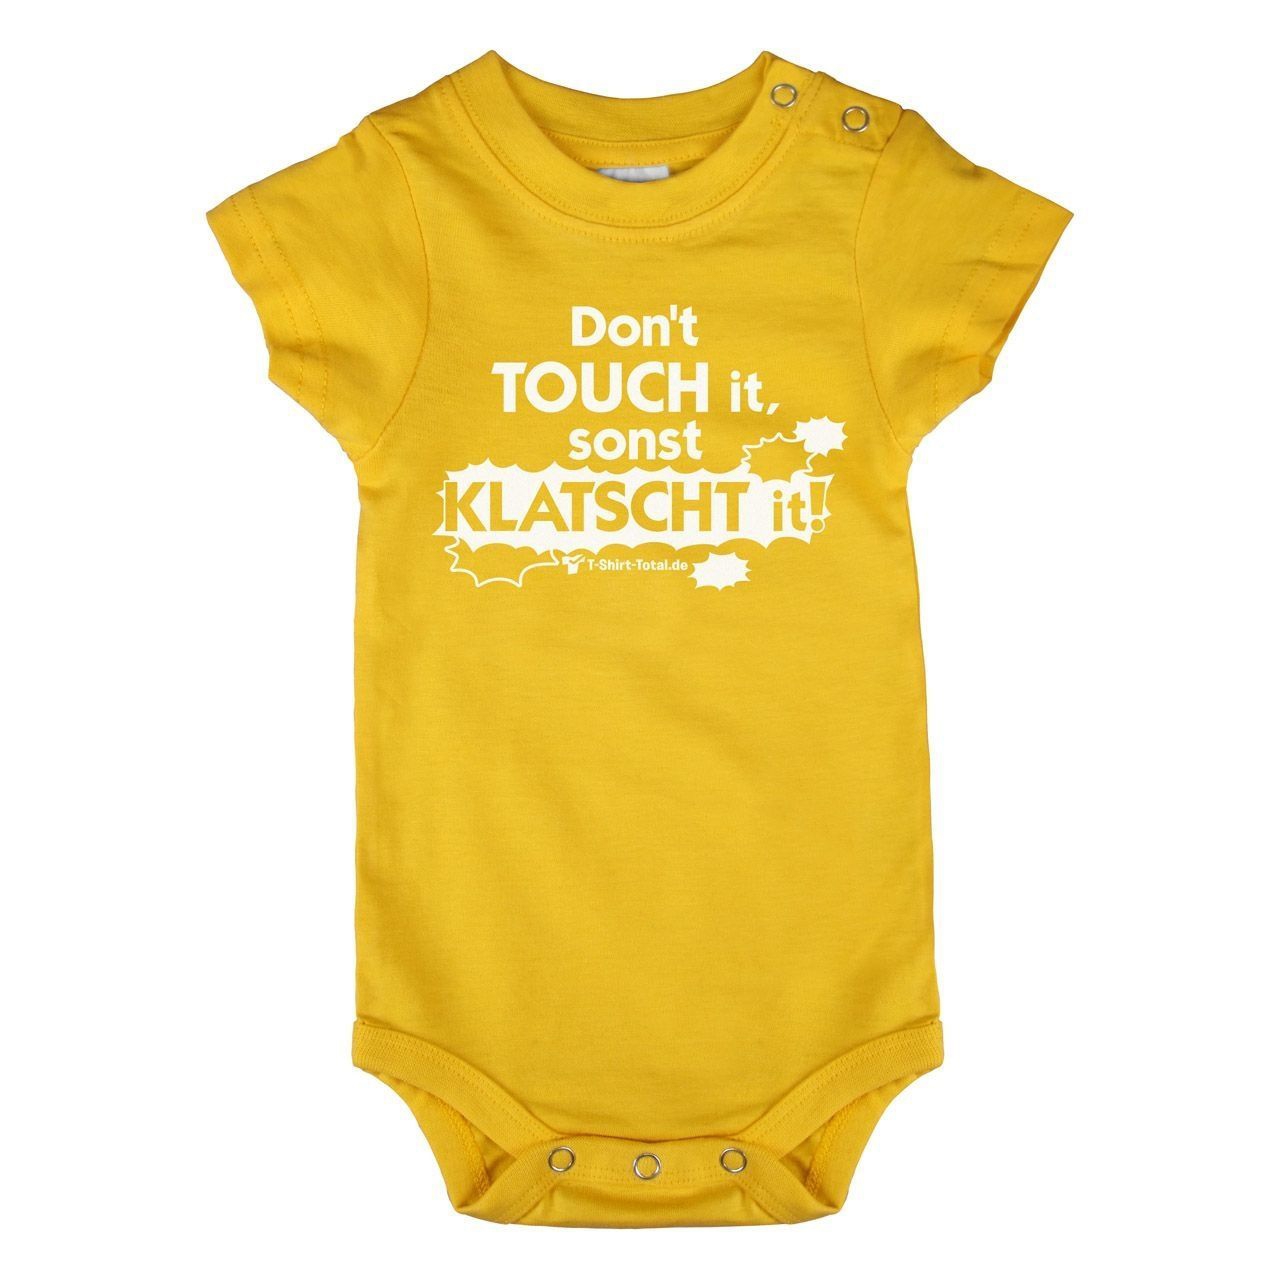 Dont touch it Baby Body Kurzarm gelb 56 / 62